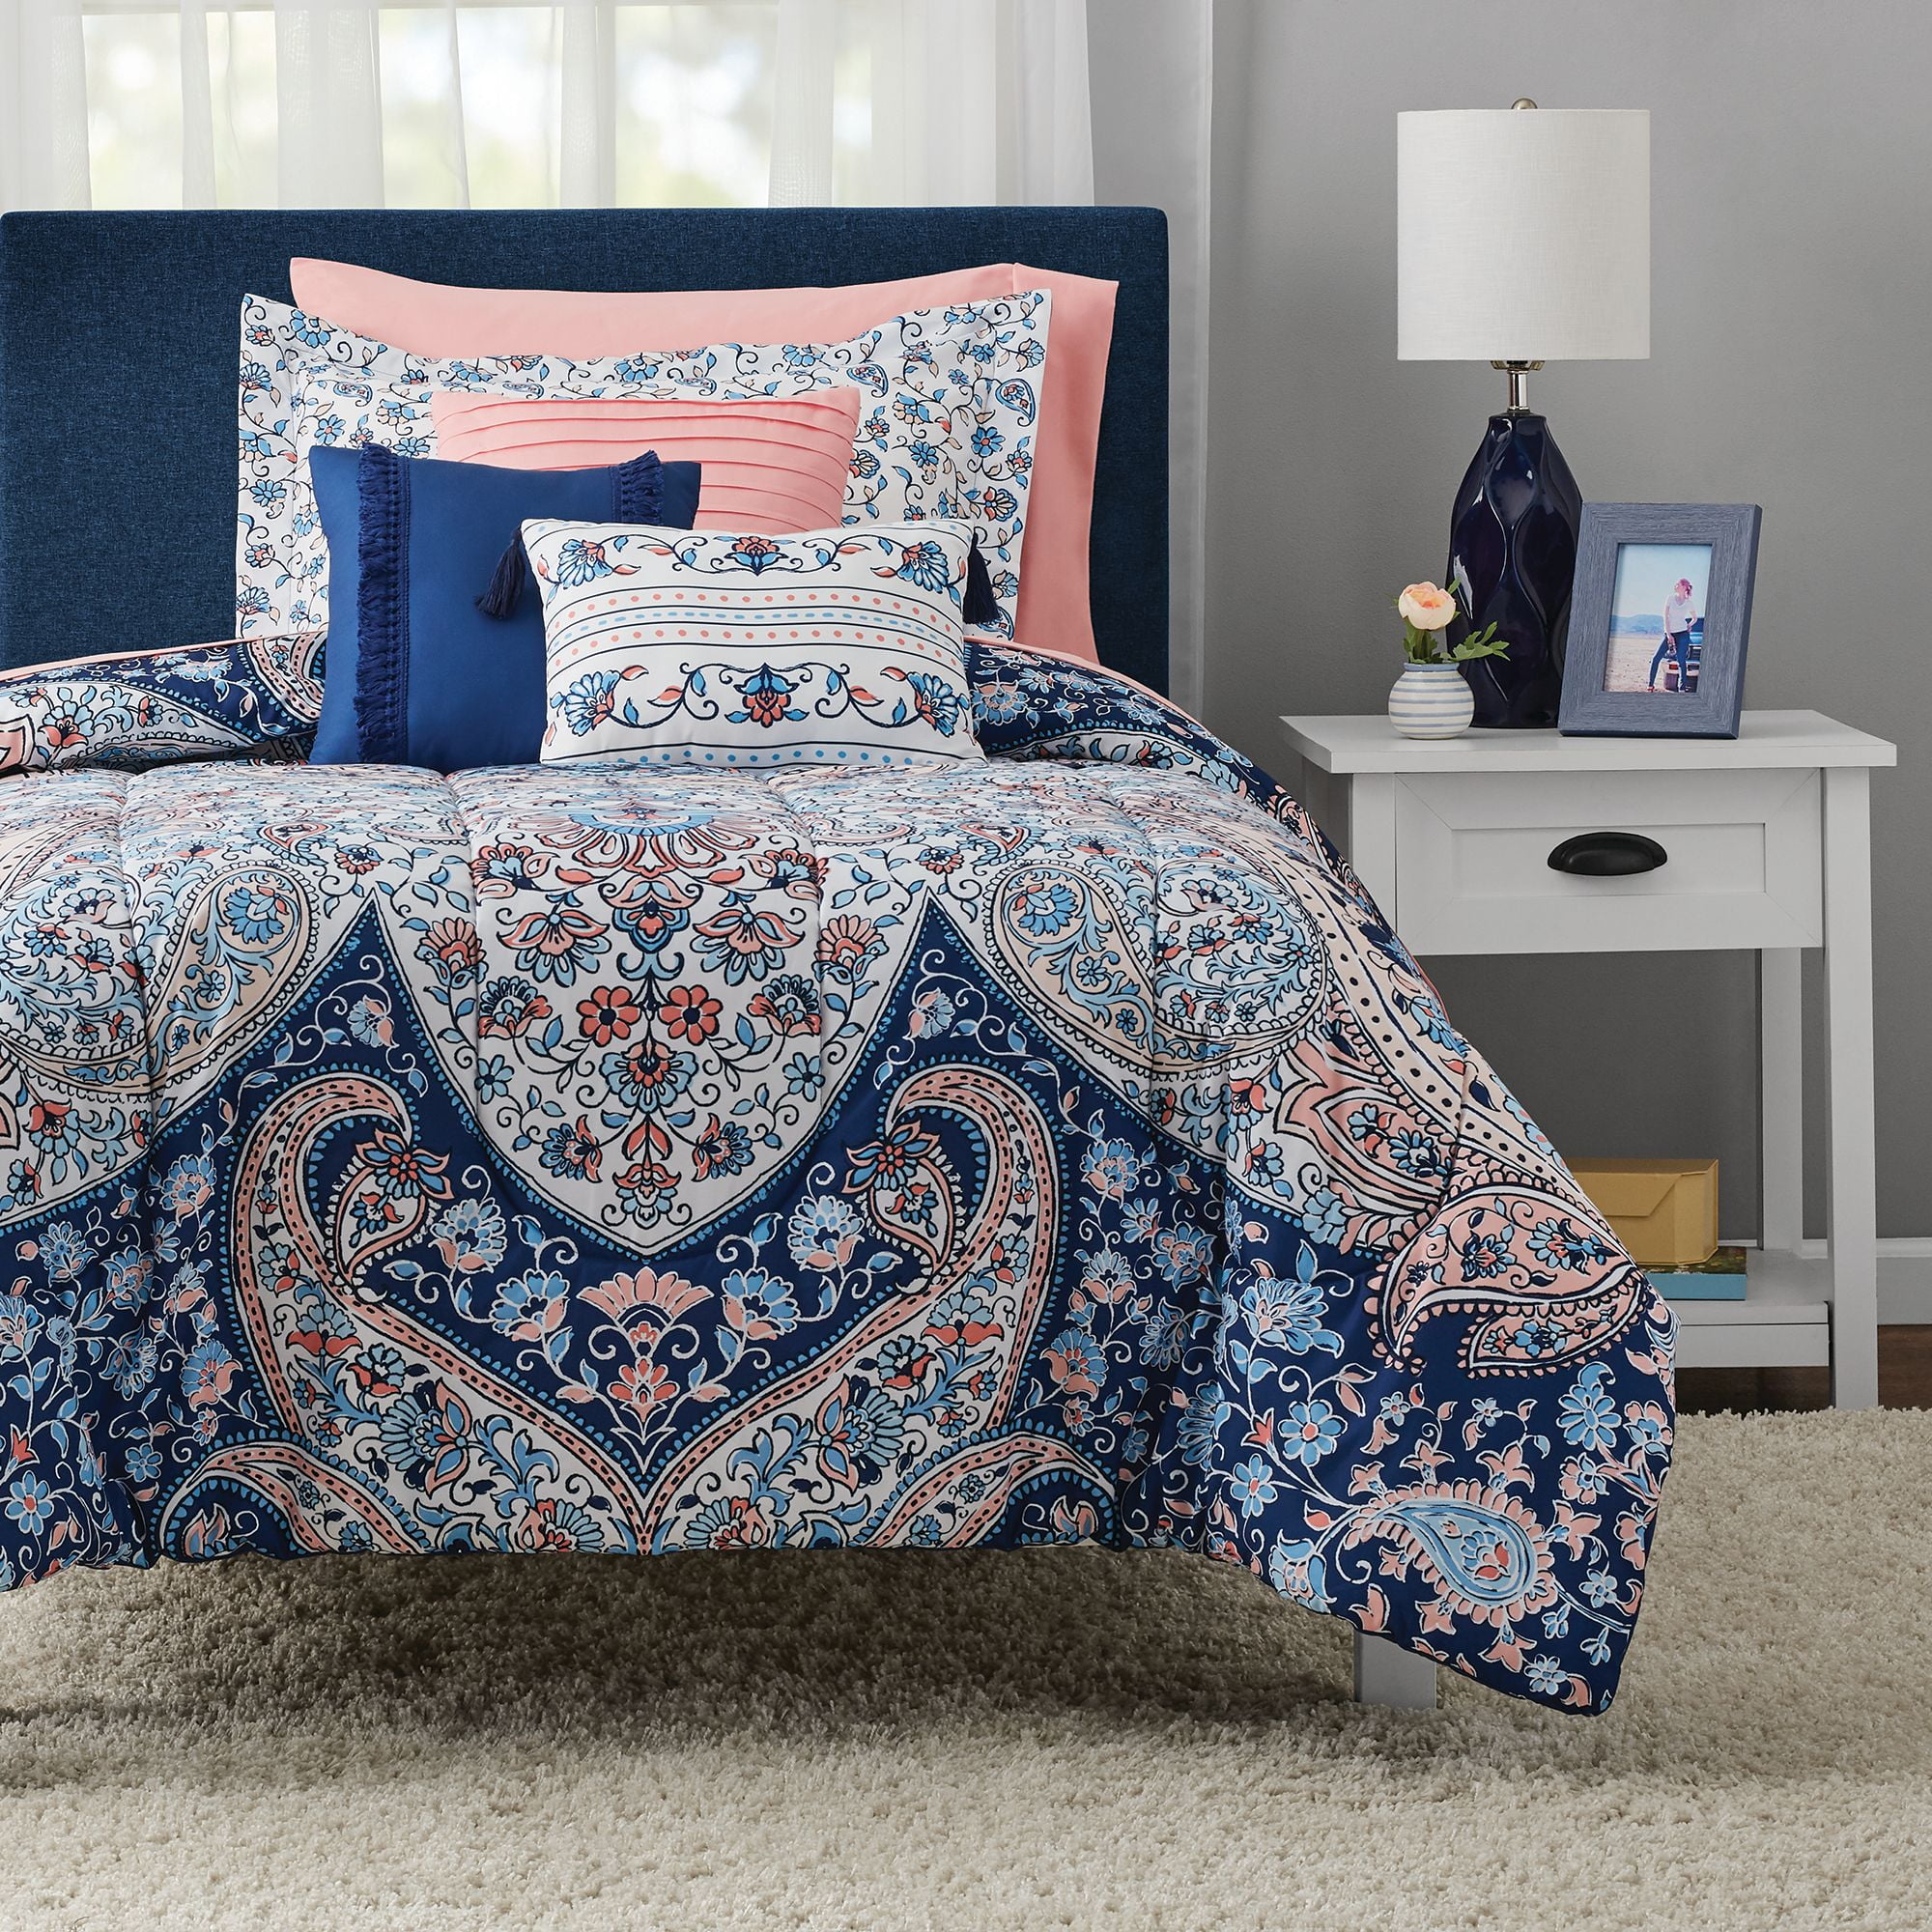 Details about   Mainstays Medallion Bed in a Bag 8-Piece Bedding Comforter Set Multiple Sizes 